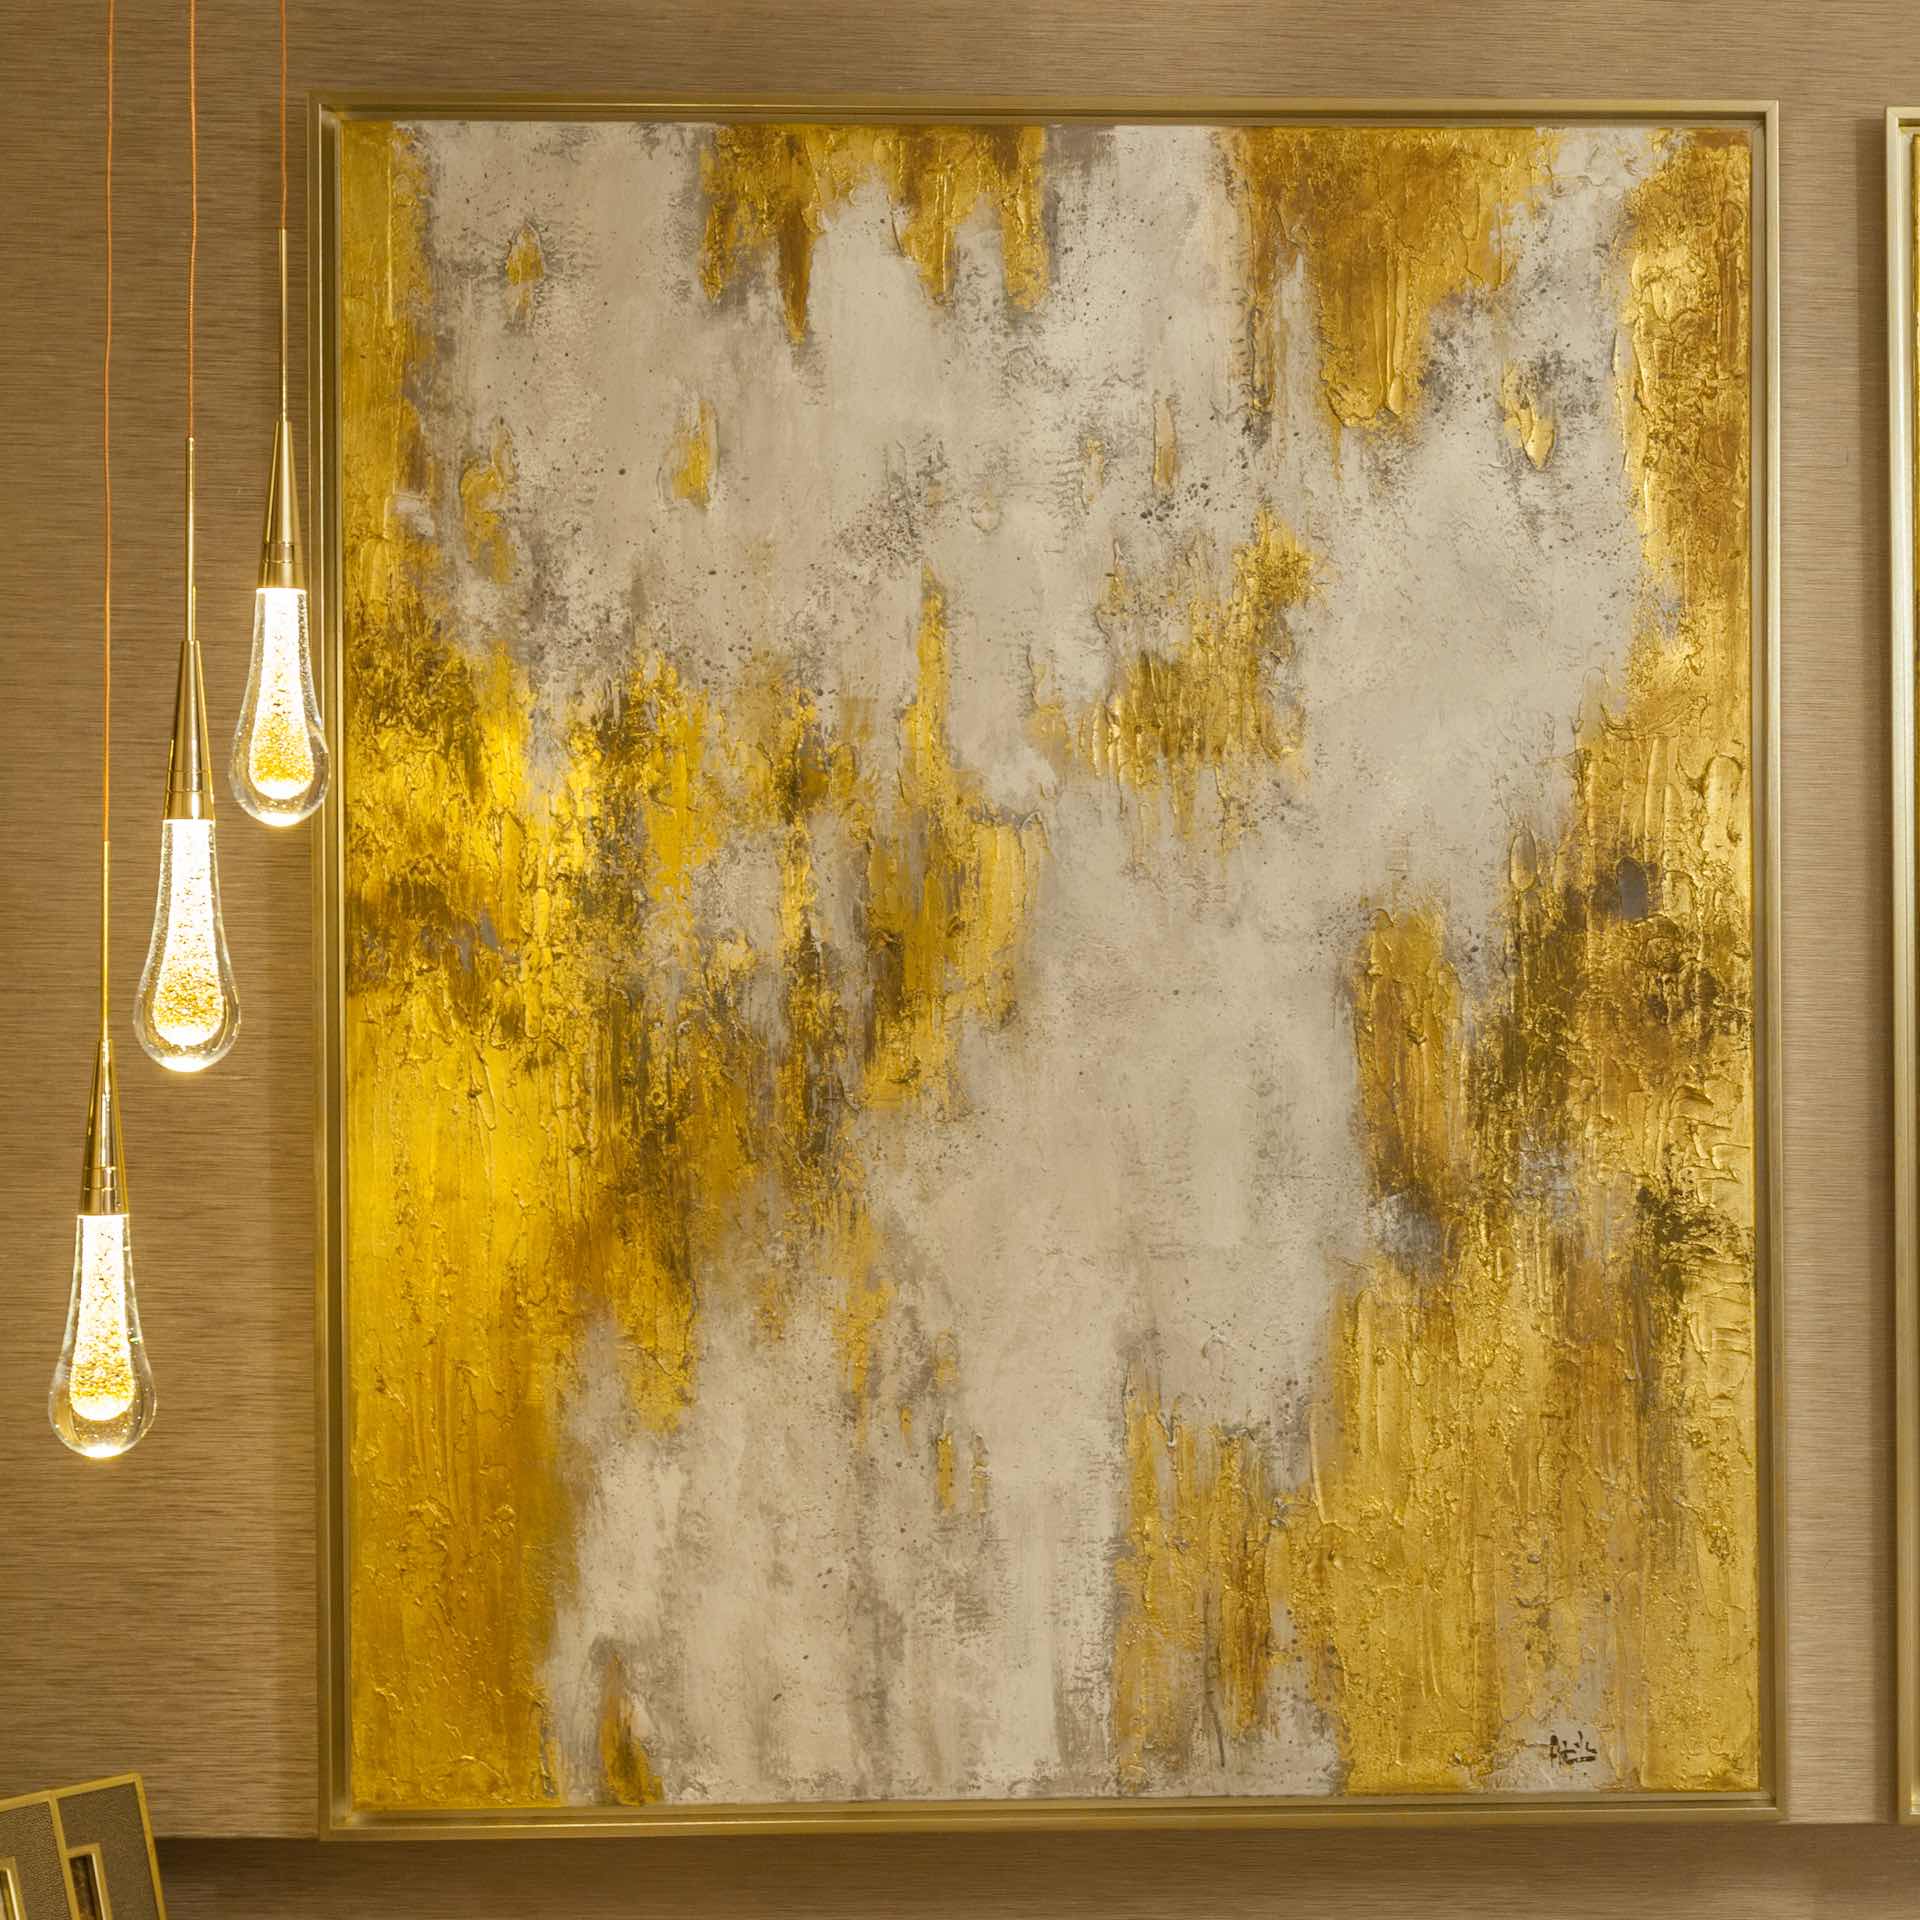 Original Gold Leaf Abstract Painting Juliettes Interiors